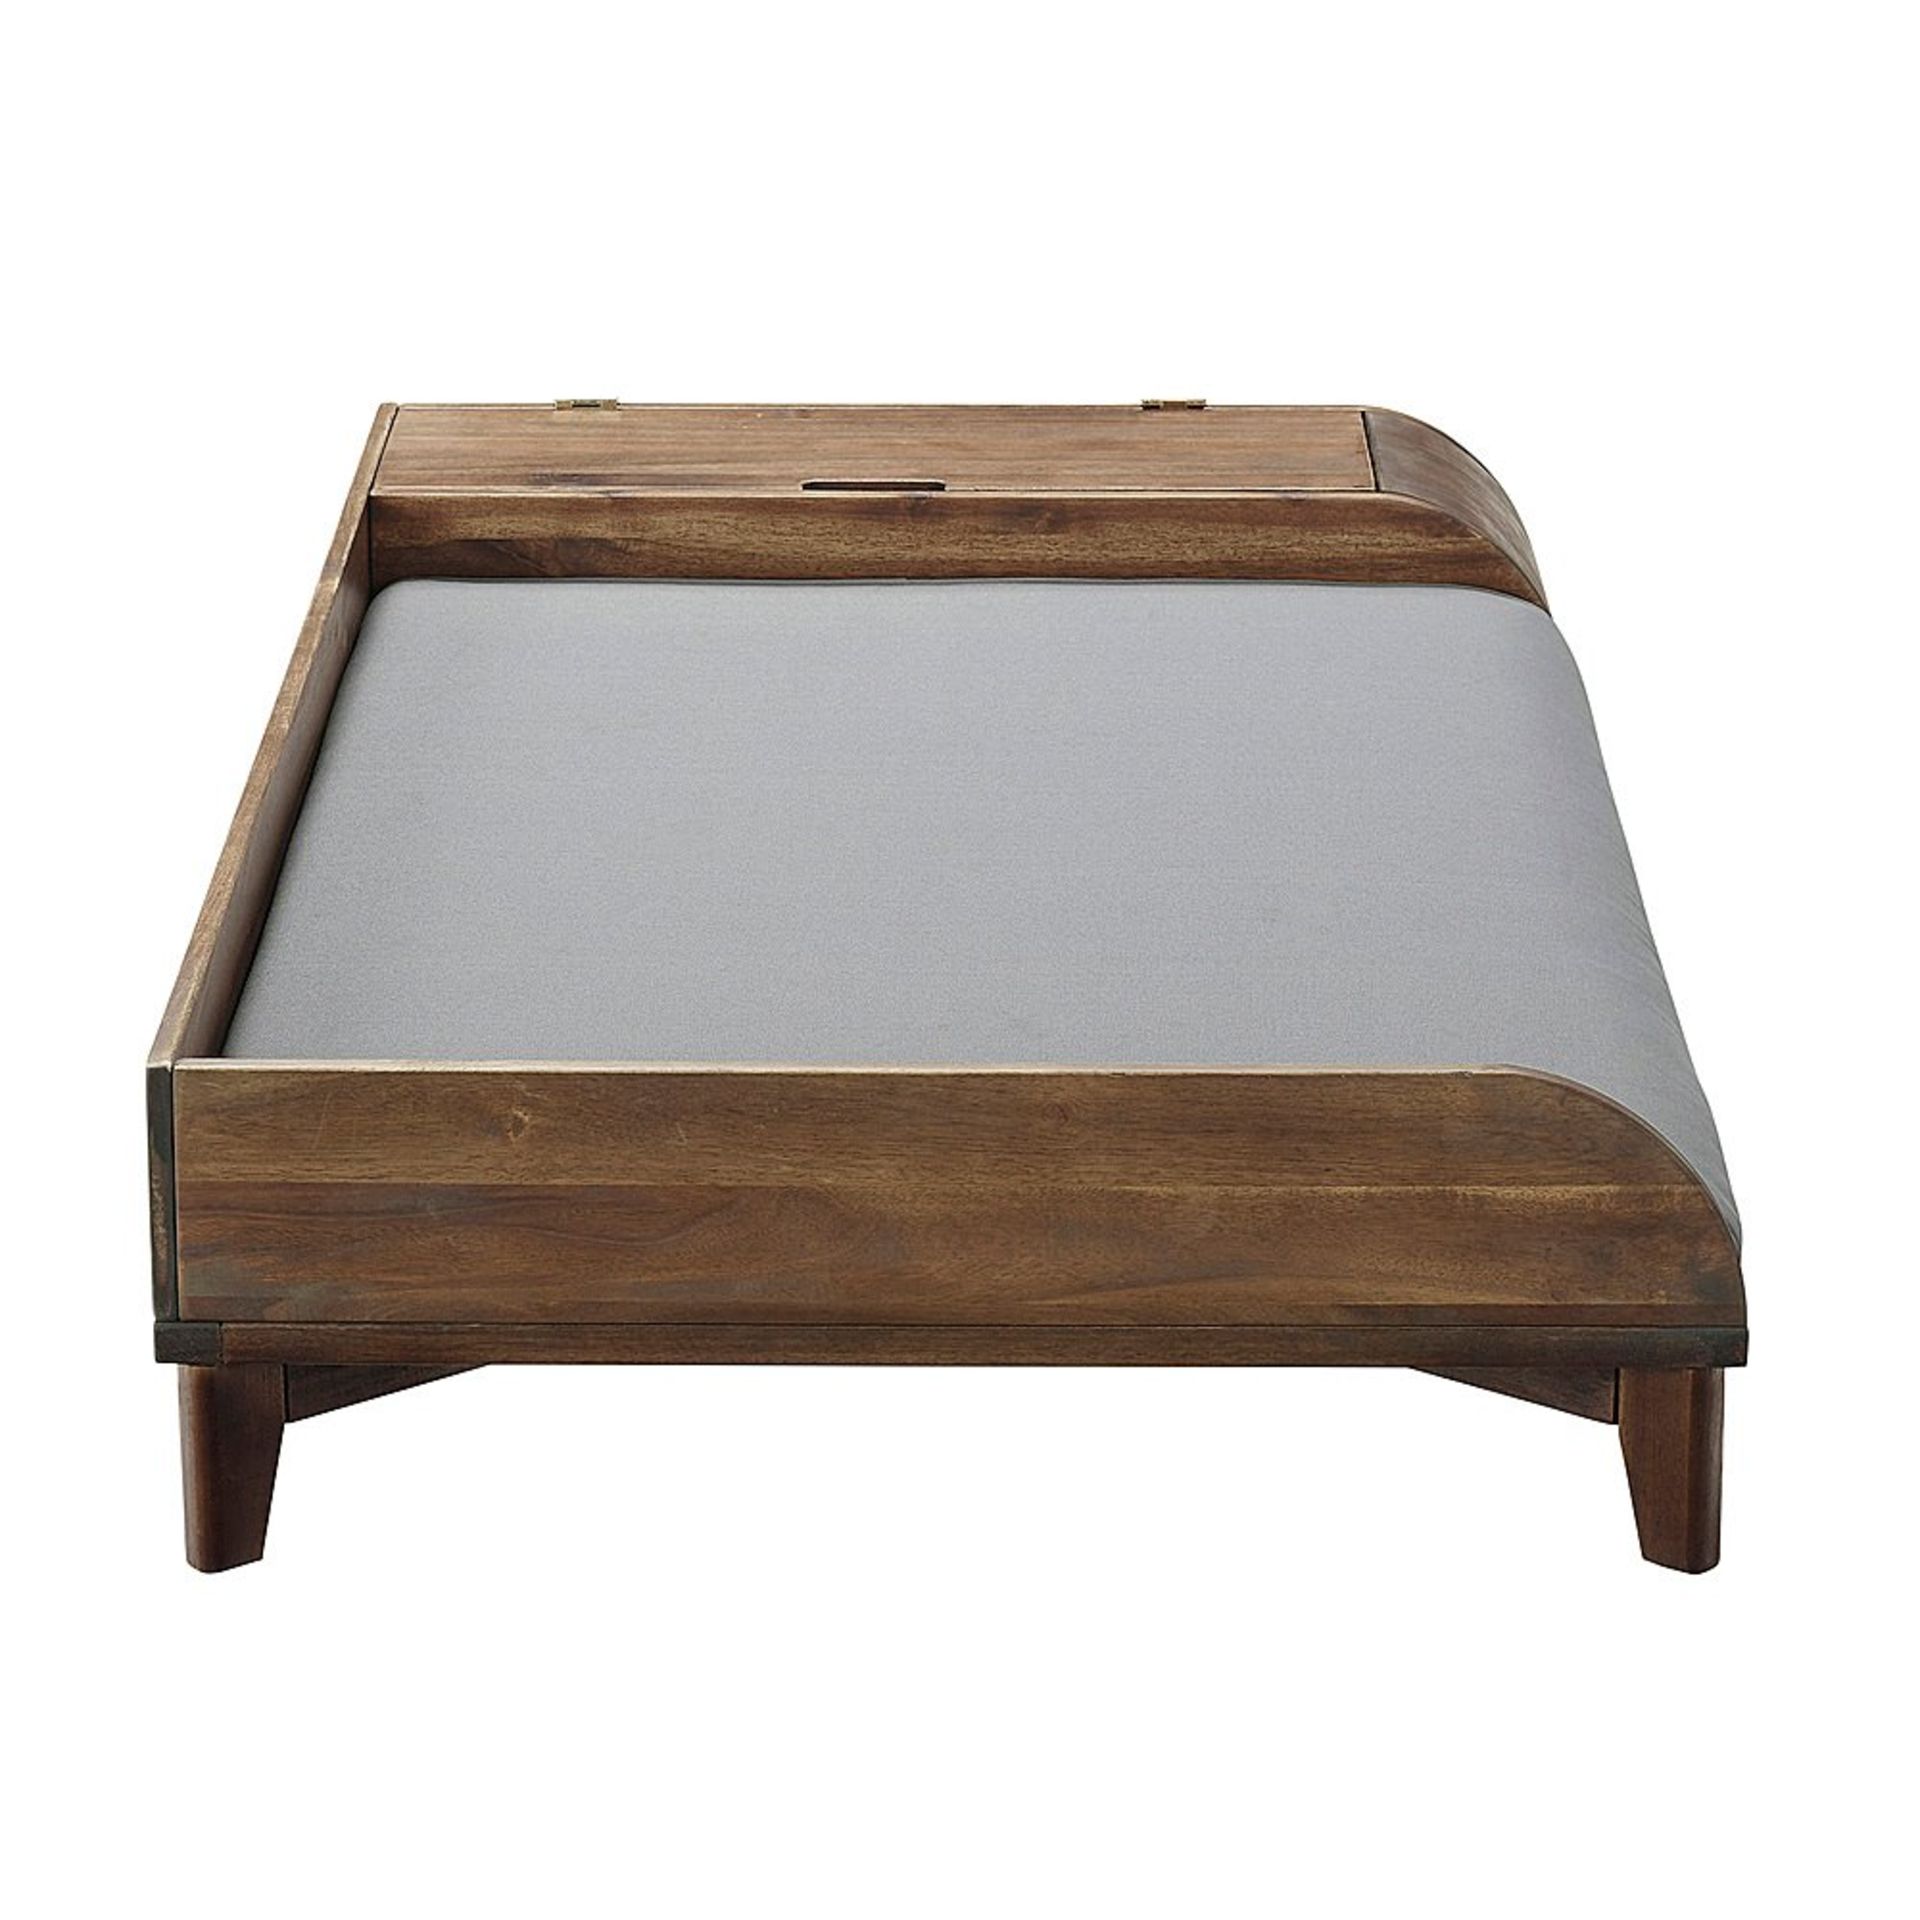 A1 PRODUCT NEW - SOLID WOOD STORAGE PED BED WITH CUSHION IN DARK BROWN/GREY - RRP Ã‚Â£245 - Image 6 of 7